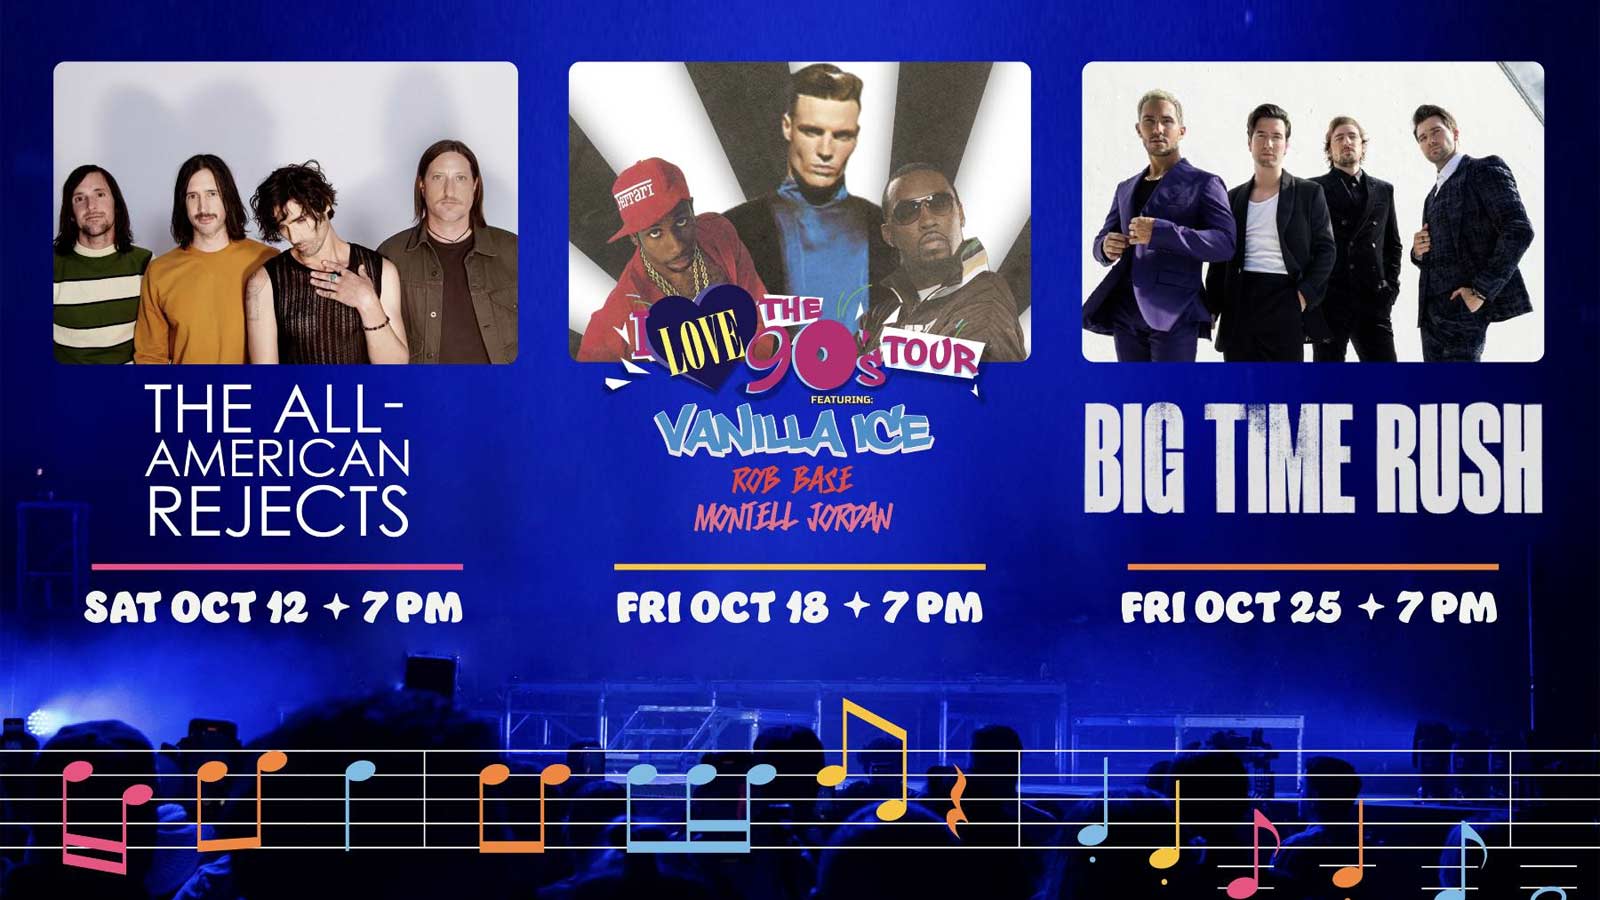 Arizona State Fair concert series: 3 acts revealed